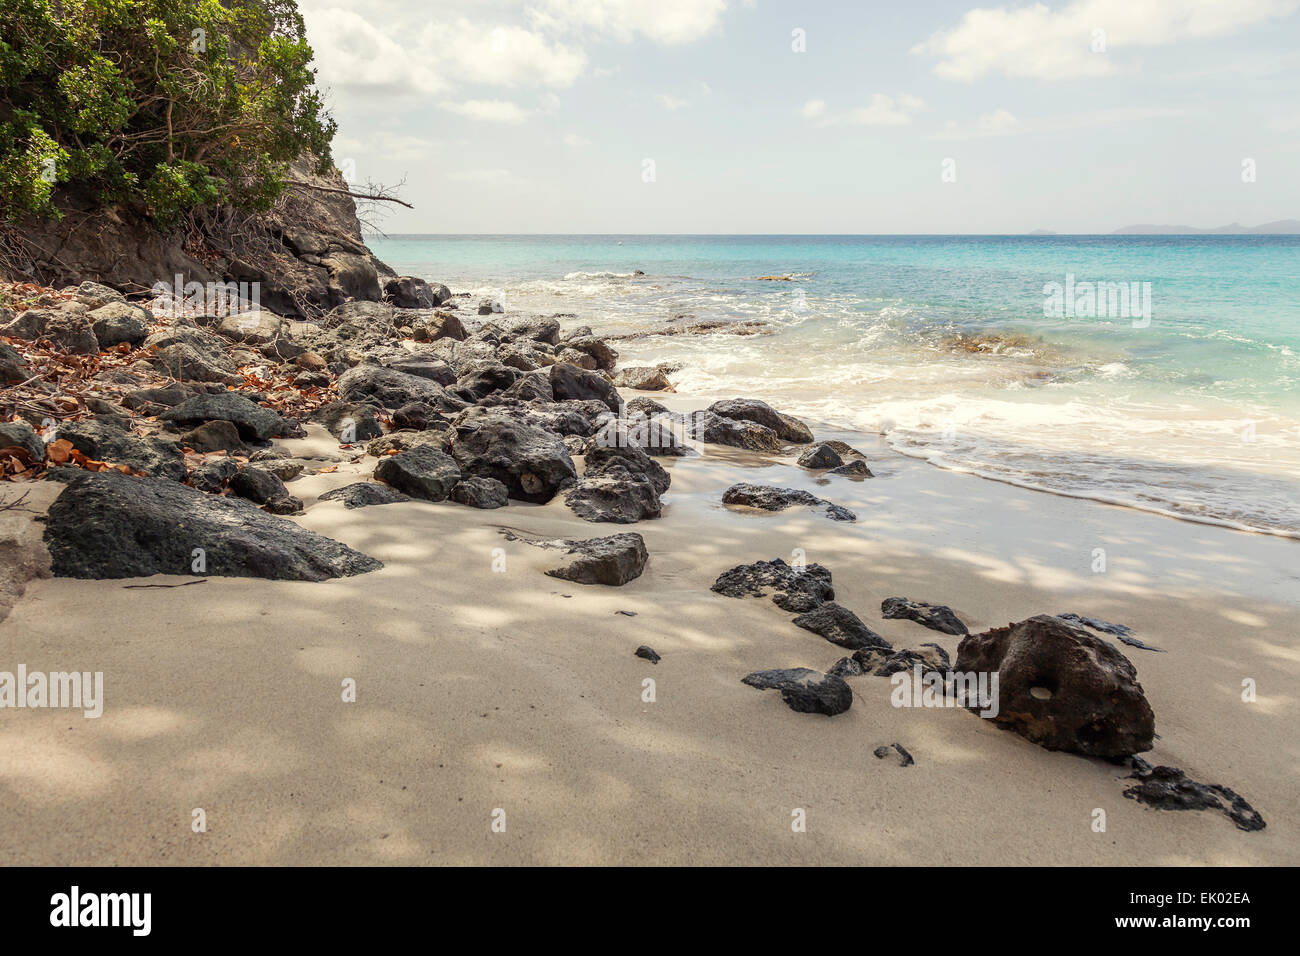 Rocky beach on tropical island of Mustique. Stock Photo